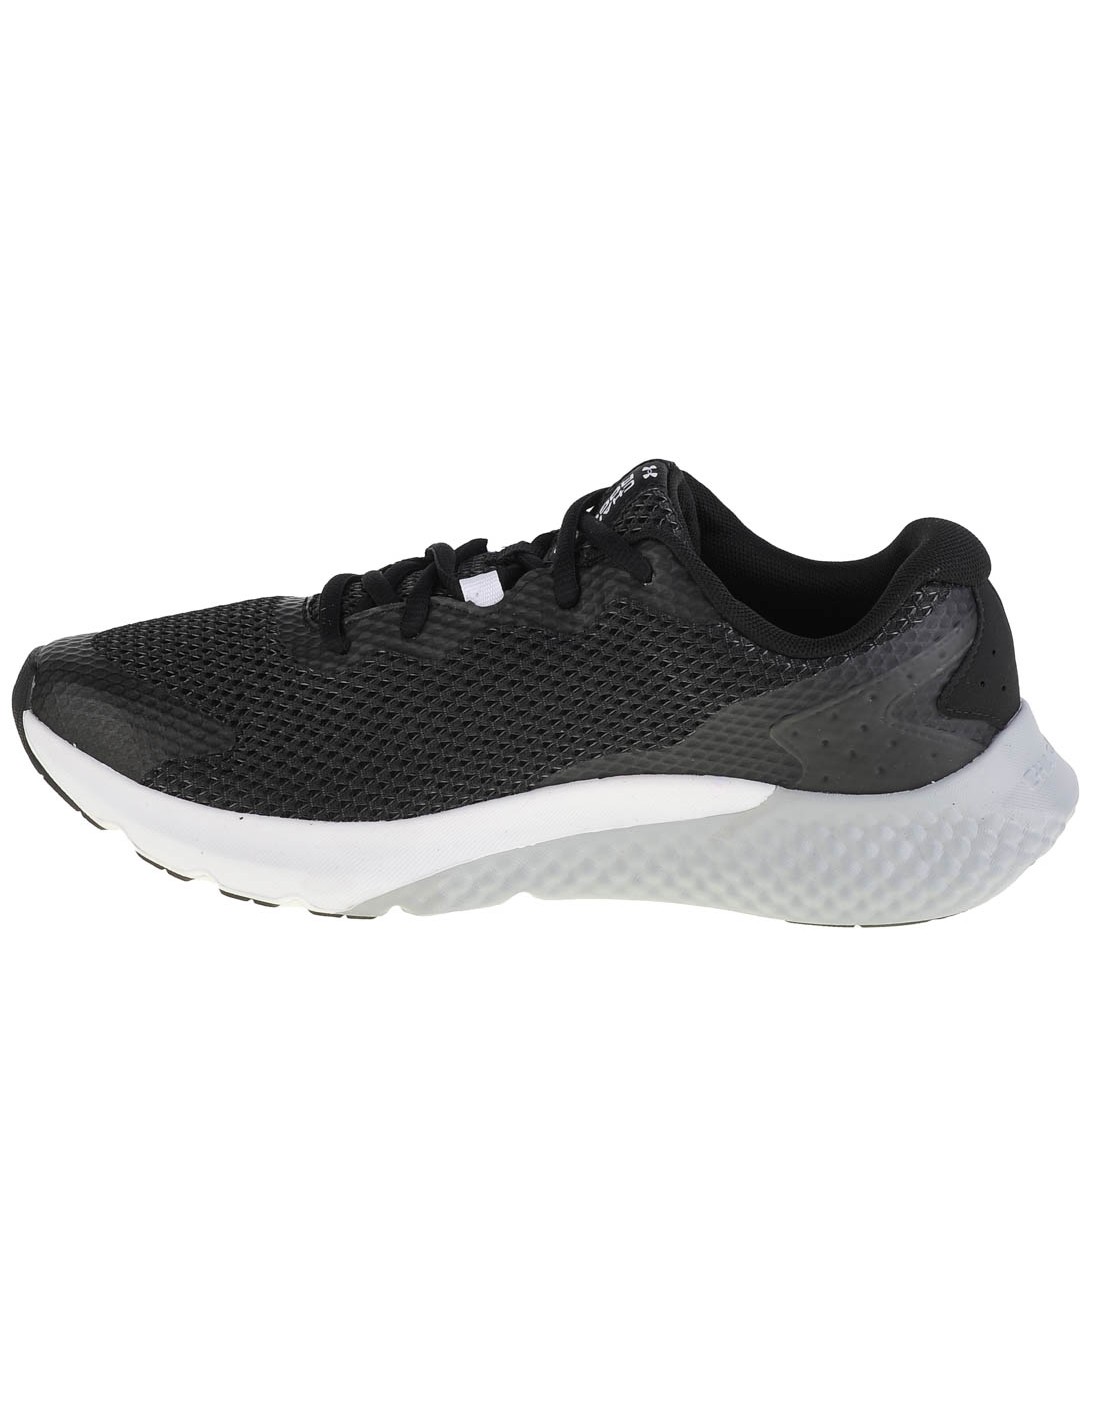 Under Armour Charged Rogue 3 3024877-002